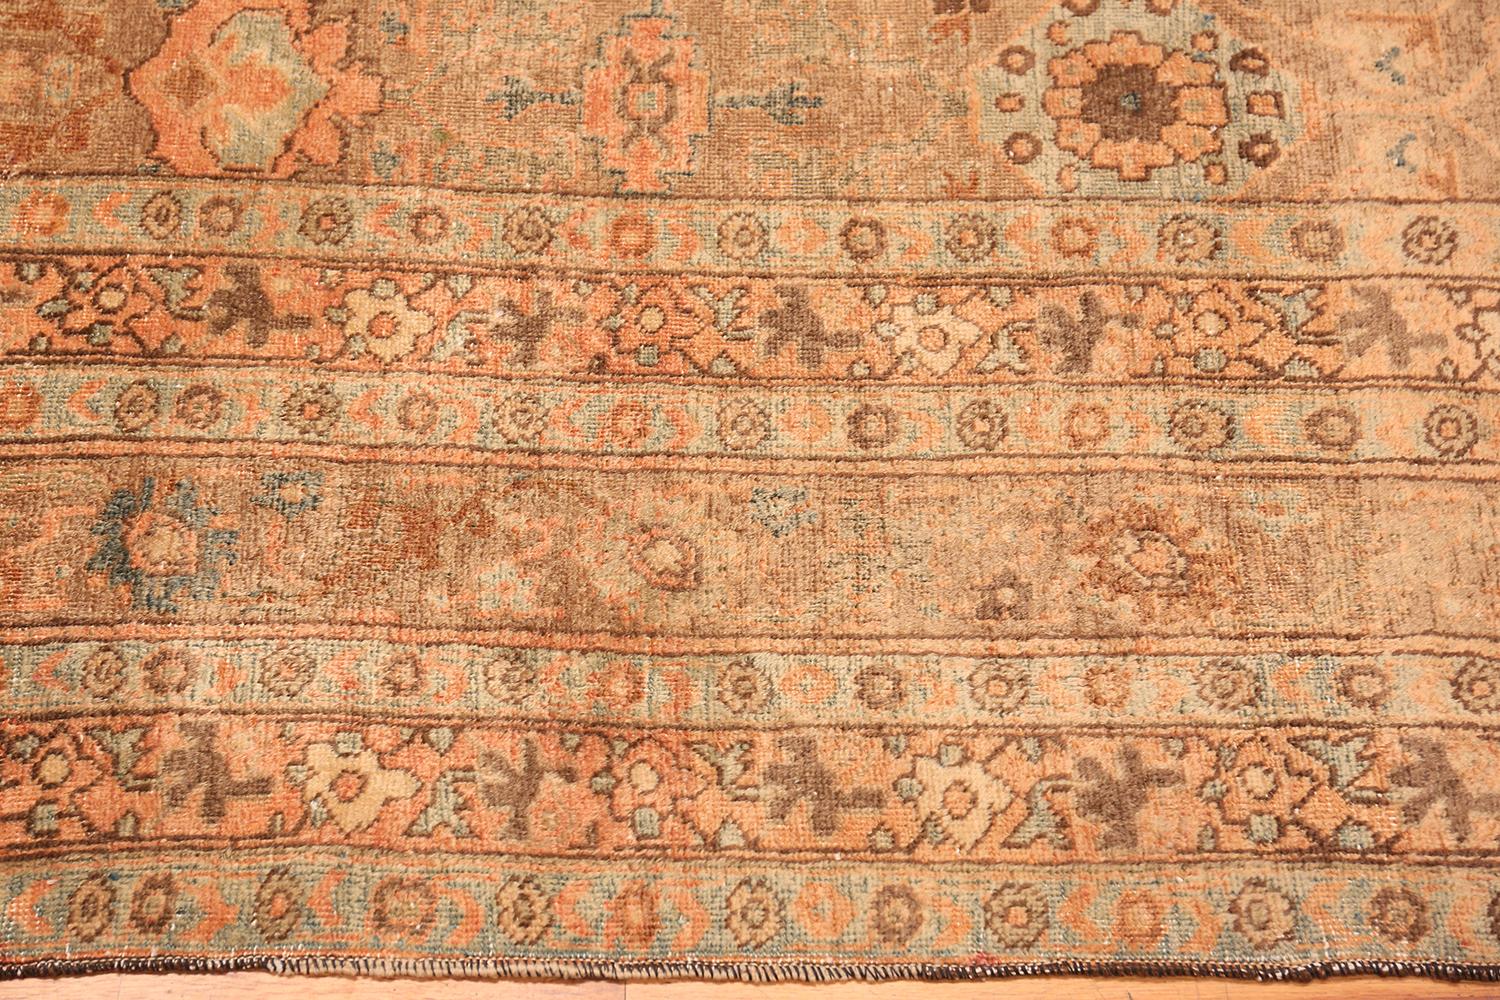 Magnificent large antique Persian Tabriz rug, country of origin / rug type: Persian rug, date: circa 1920. Size: 11 ft 3 in x 16 ft 4 in (3.43 m x 4.98 m). Tabriz is a traditional carpet-weaving city that is known for its diversity of design and